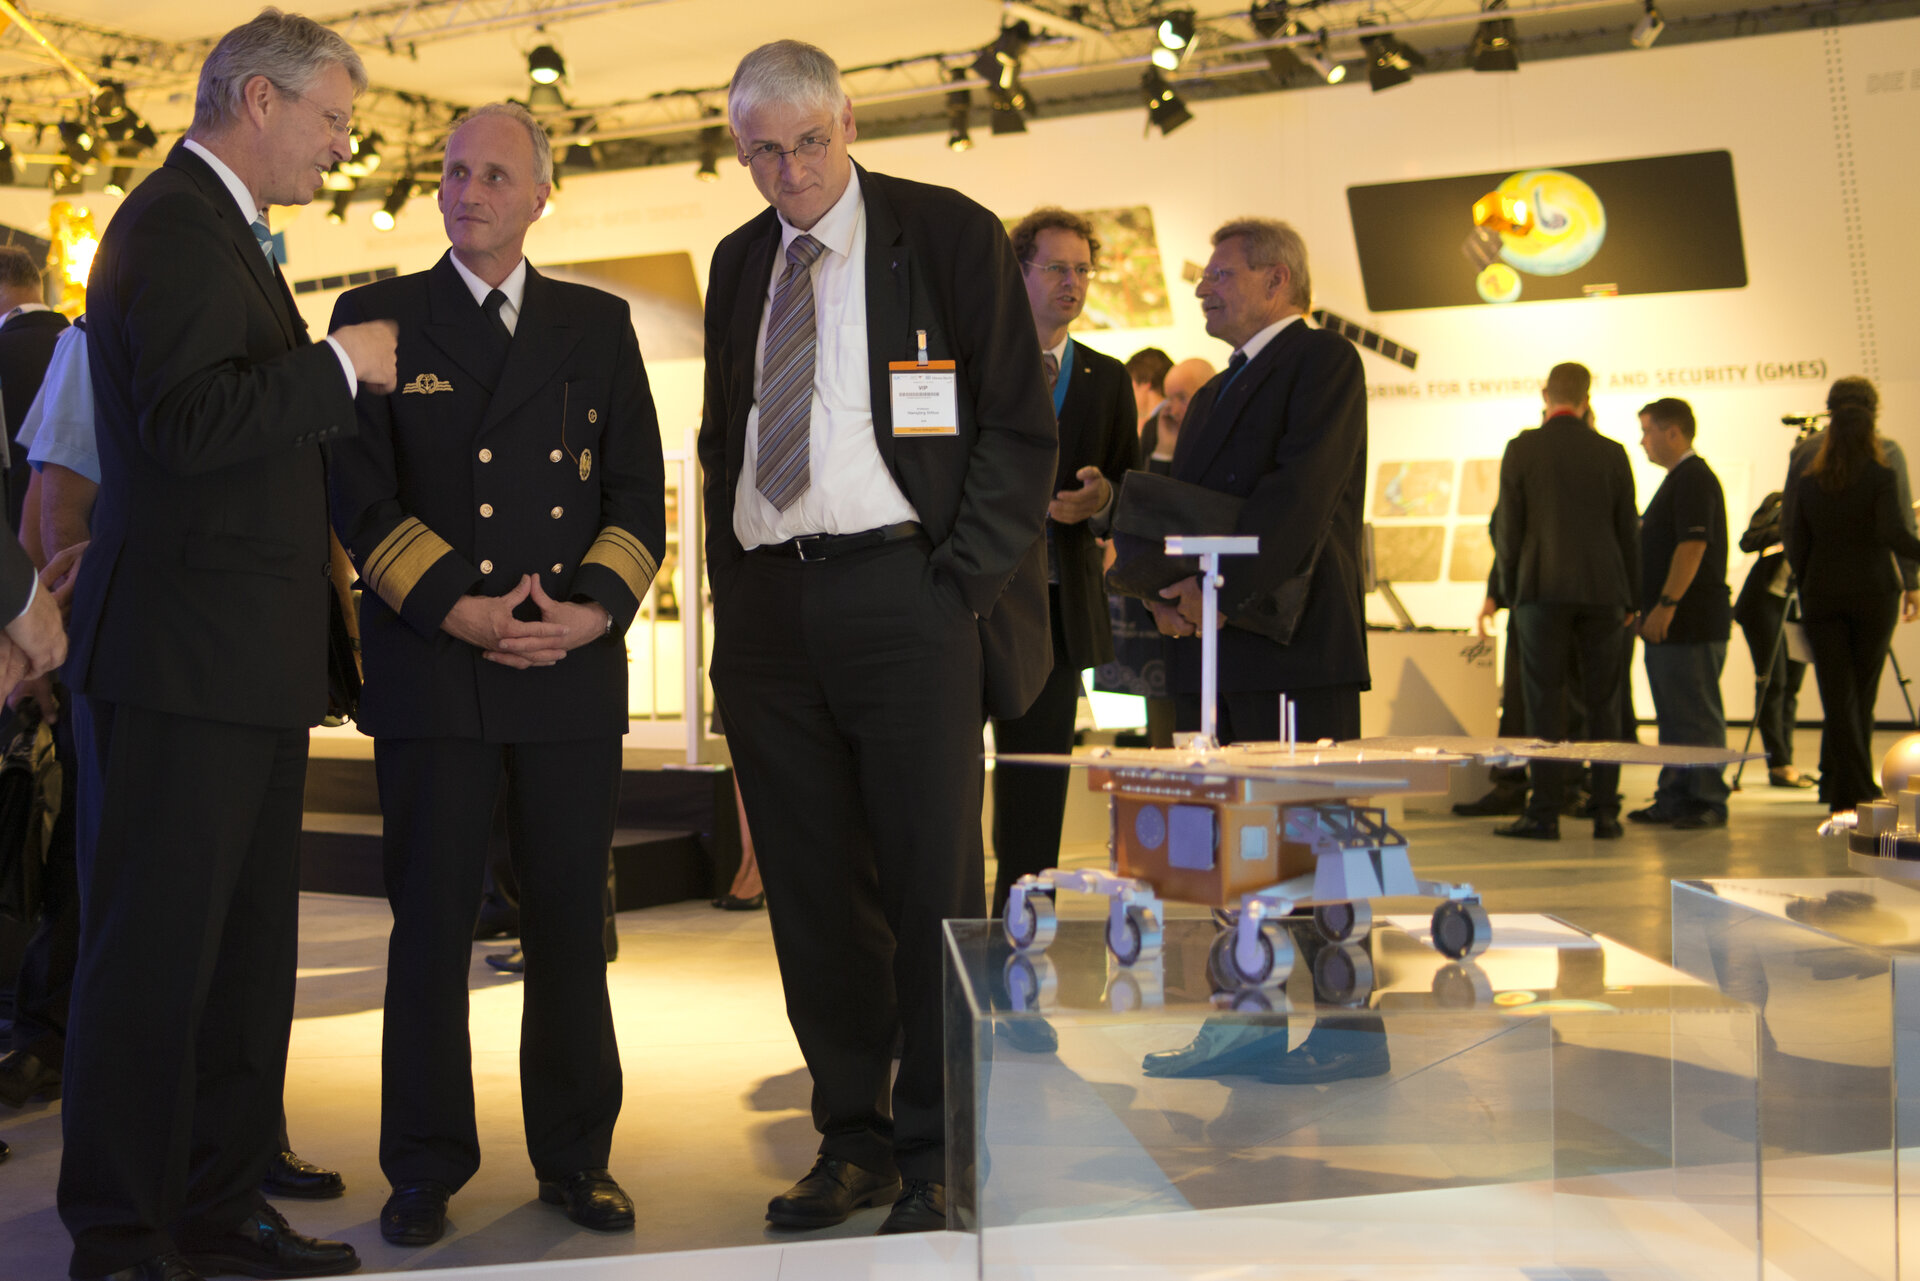 T. Reiter and J. Rühle, Head of the Planning Department German Ministry of Defense